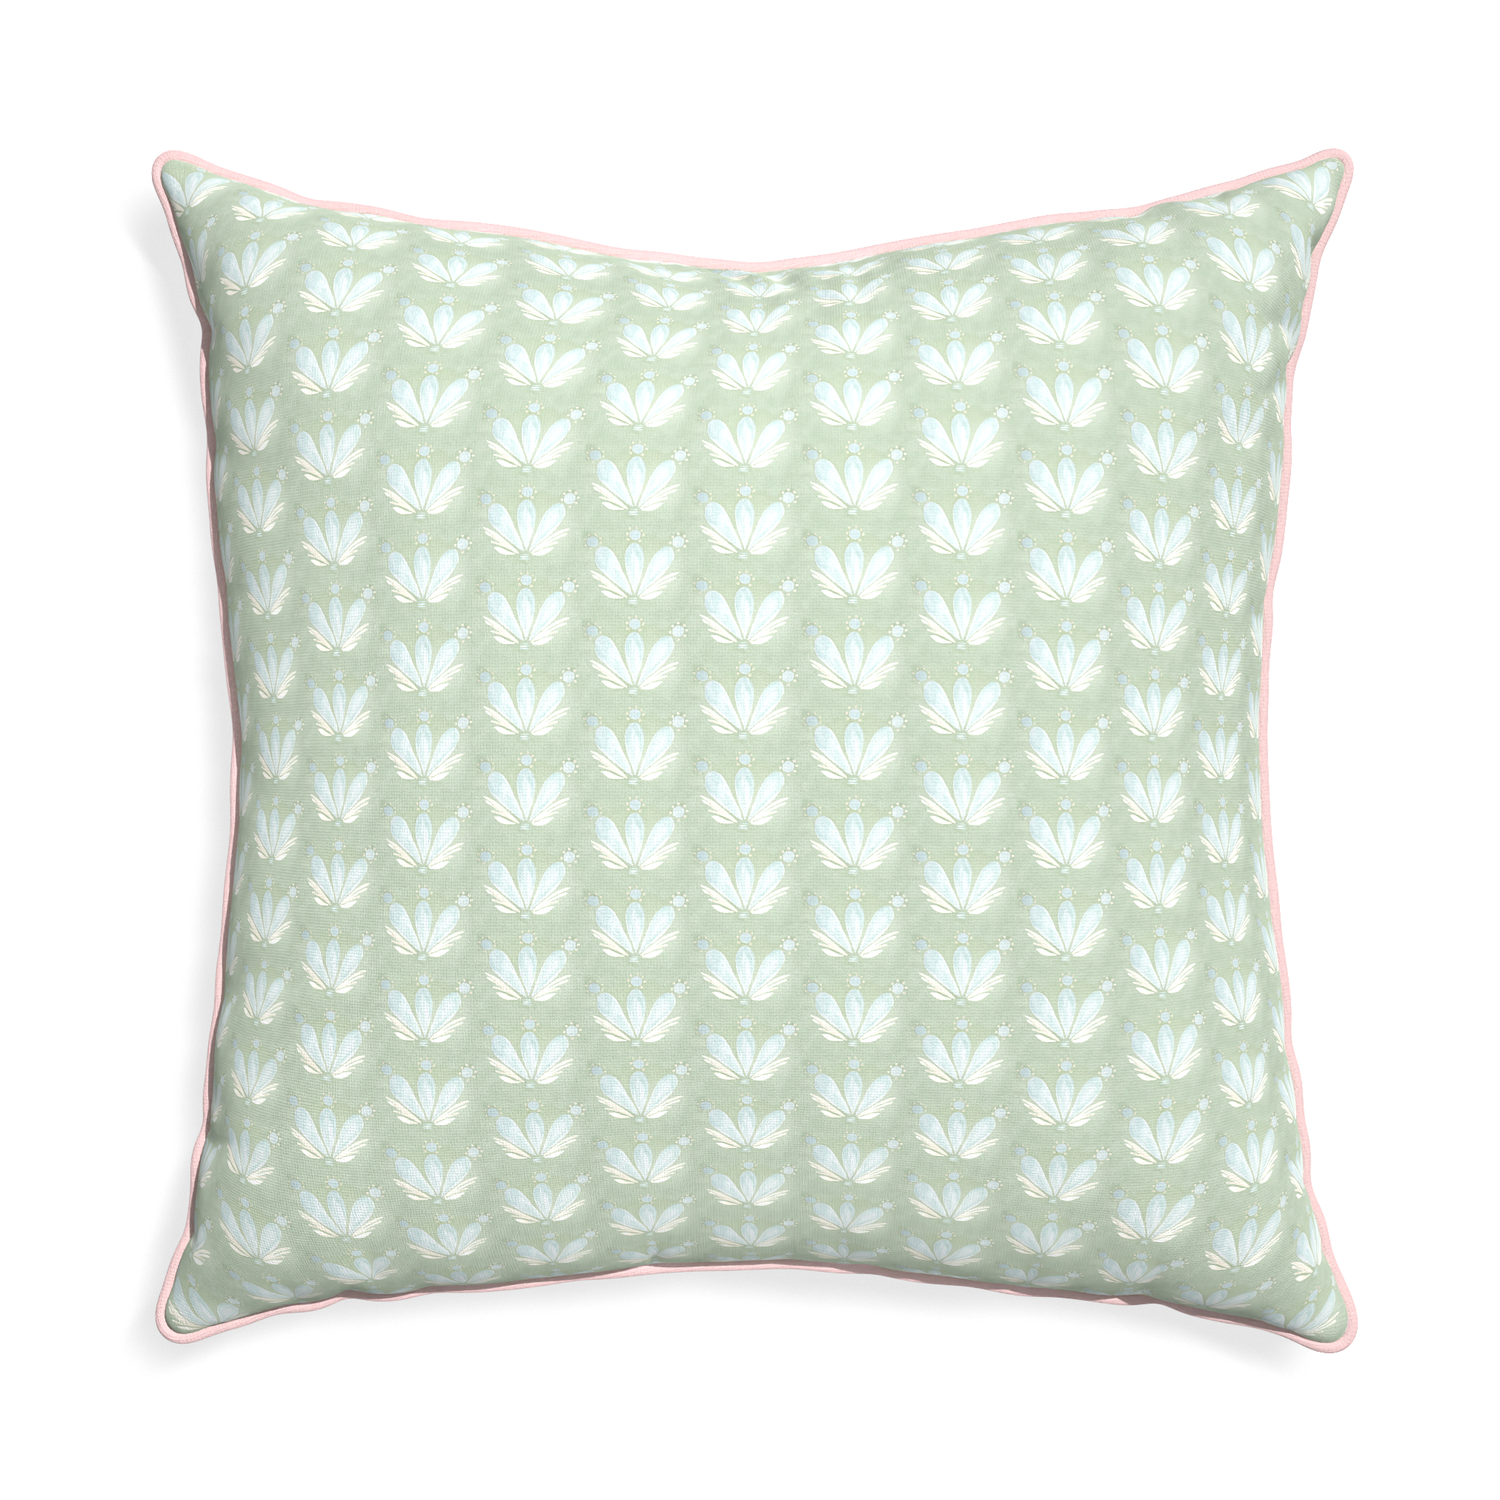 Euro-sham serena sea salt custom blue & green floral drop repeatpillow with petal piping on white background